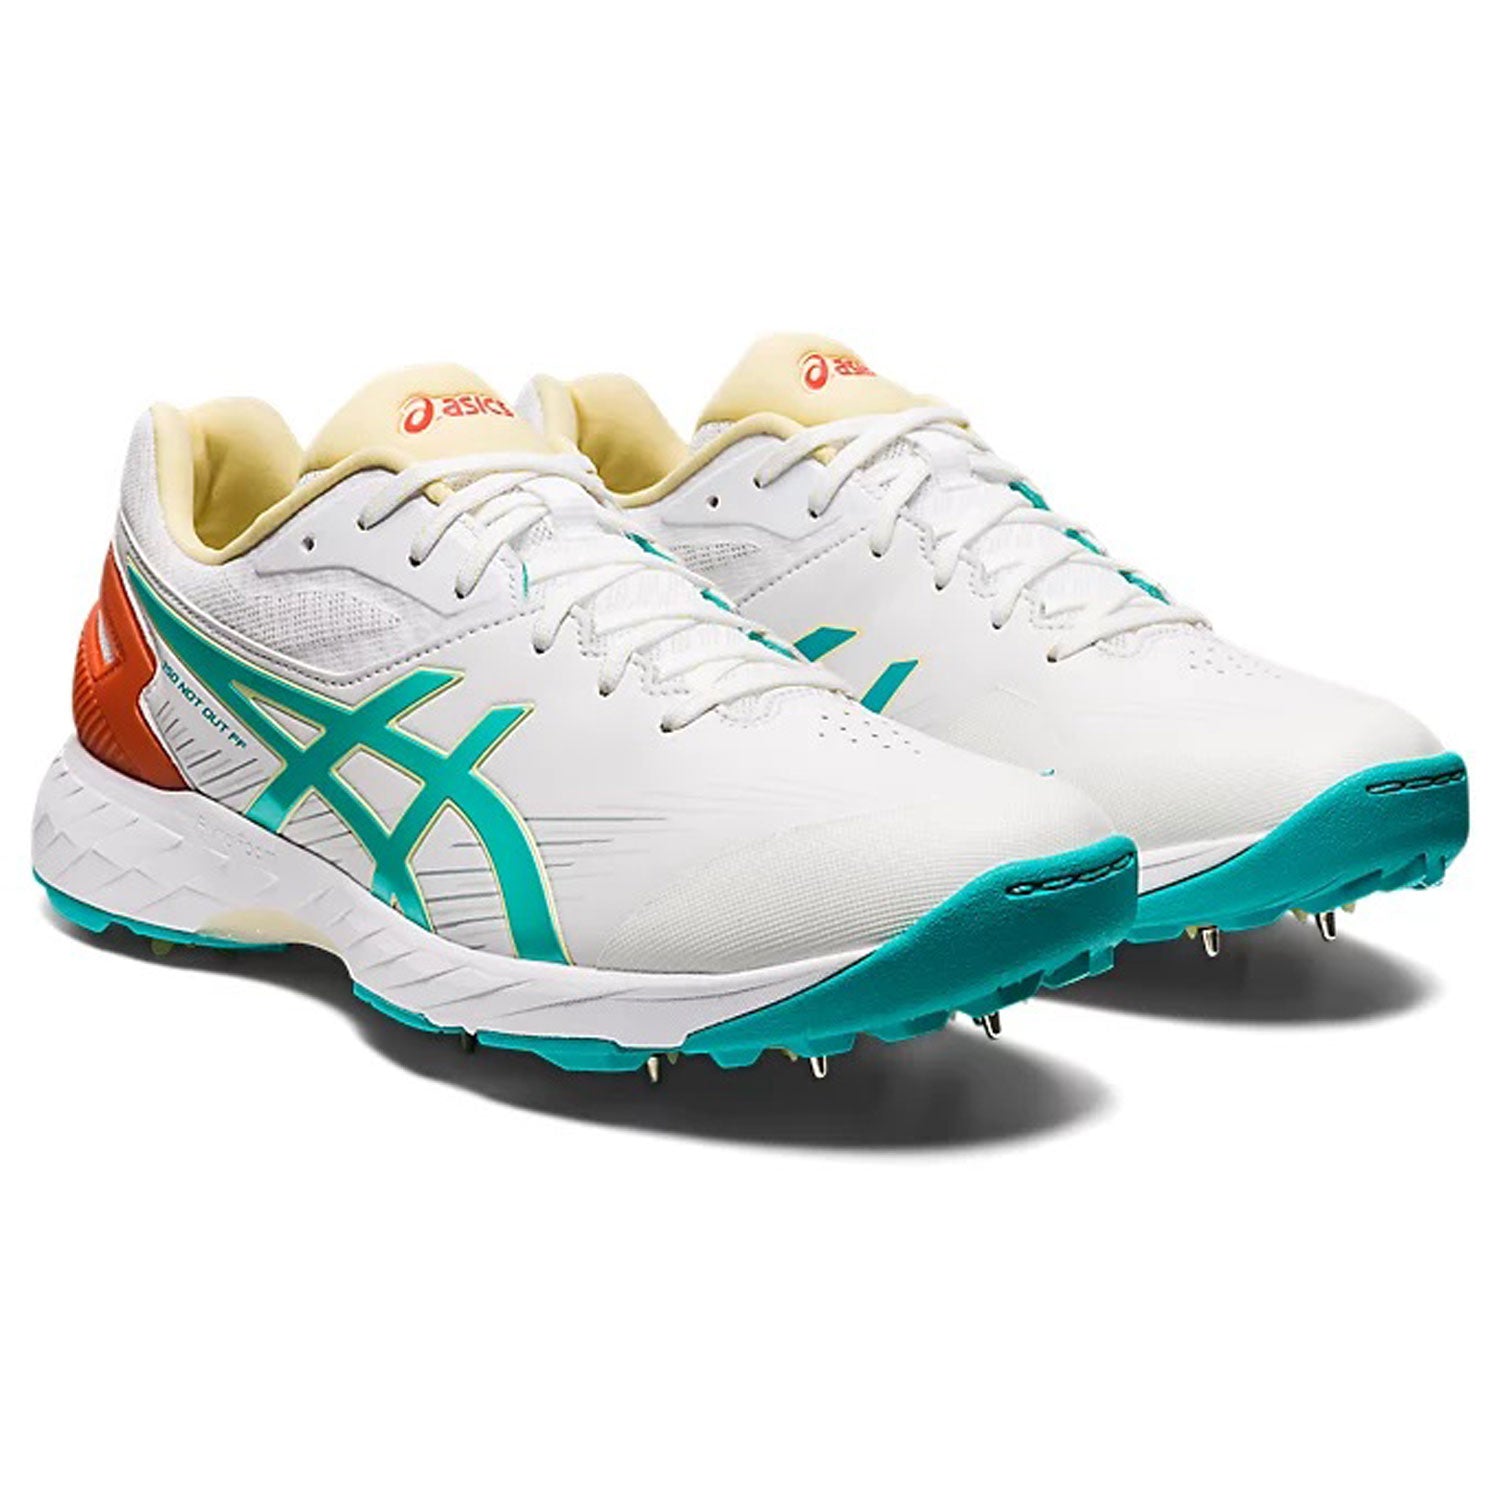 Asics Gel 350 Not Out Cricket Spikes Womens Fit